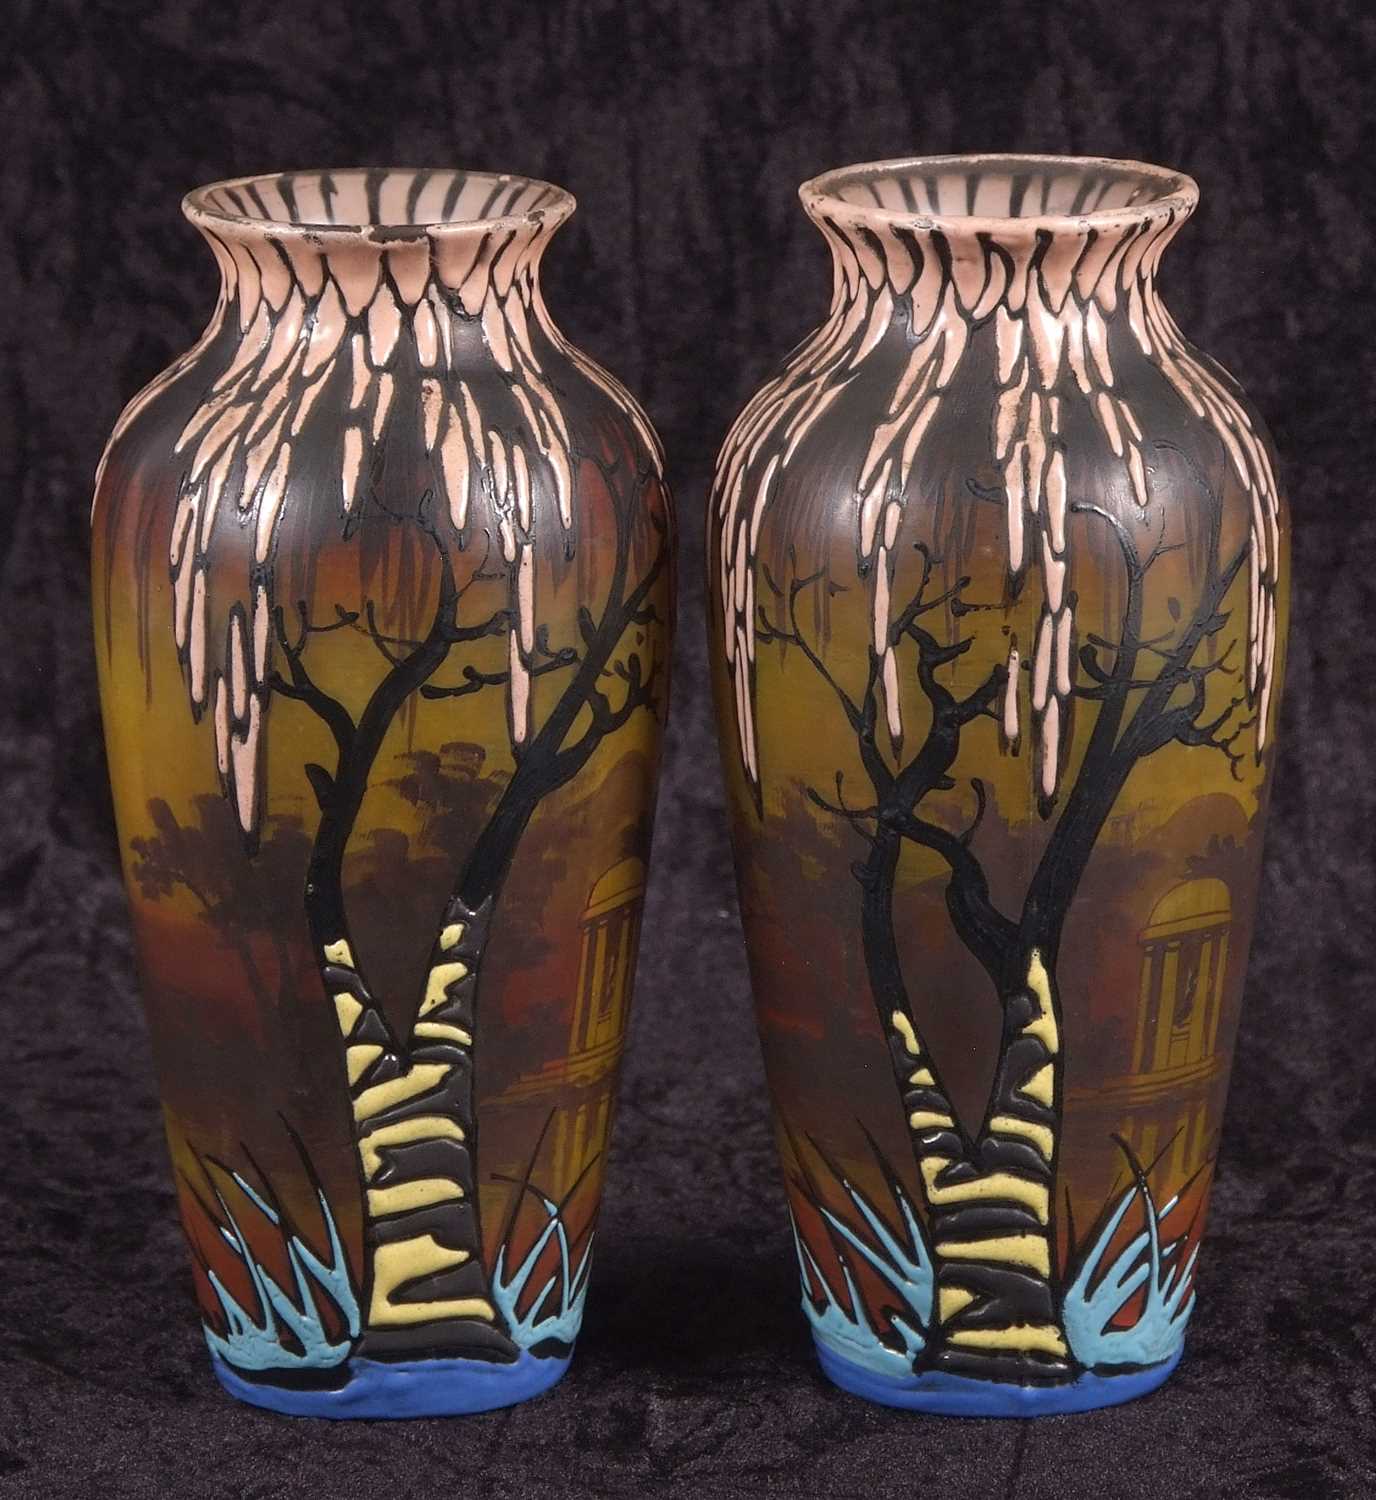 Art Deco Cameo Effect Vases by Clio - Image 3 of 7